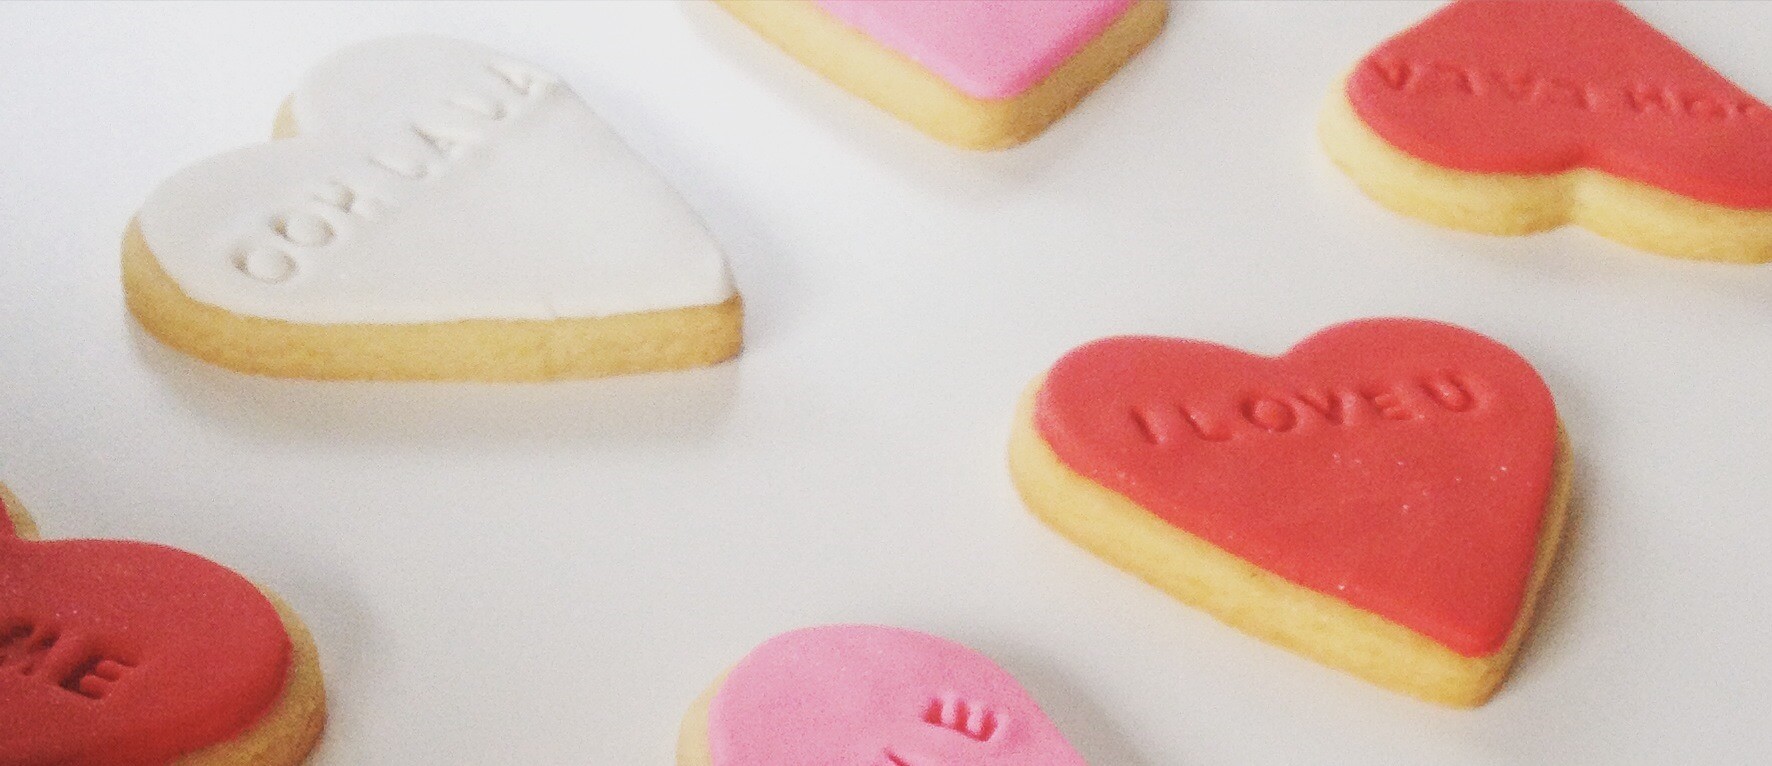 Romantic biscuits for Valentine's Day from Chez Nous Corporate Catering. Love heart shapes with romantic words on it.